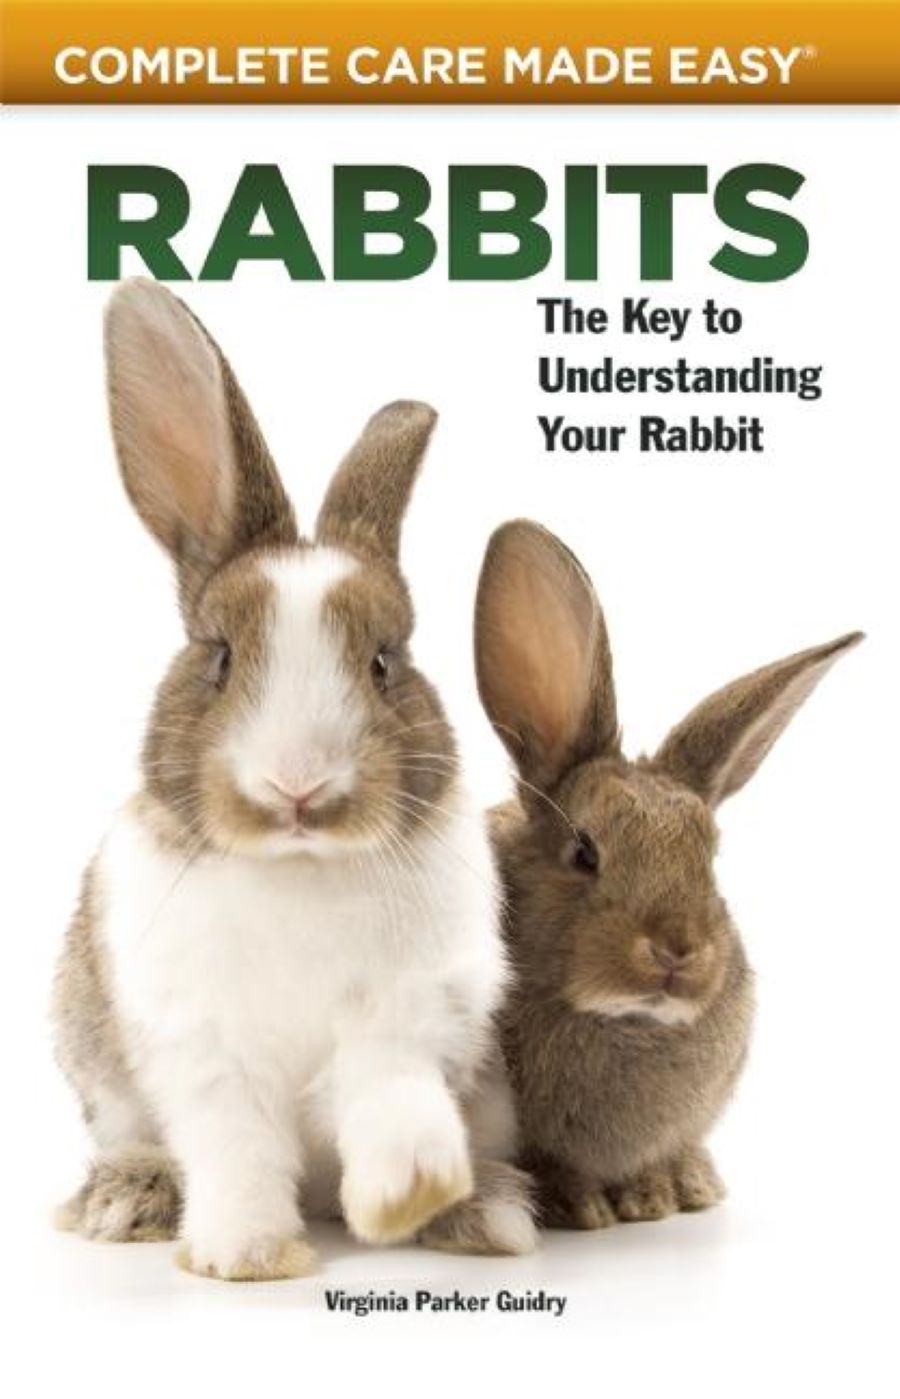 Rabbits (Complete Care Made Easy) Paperback Publication: 2014/04/08